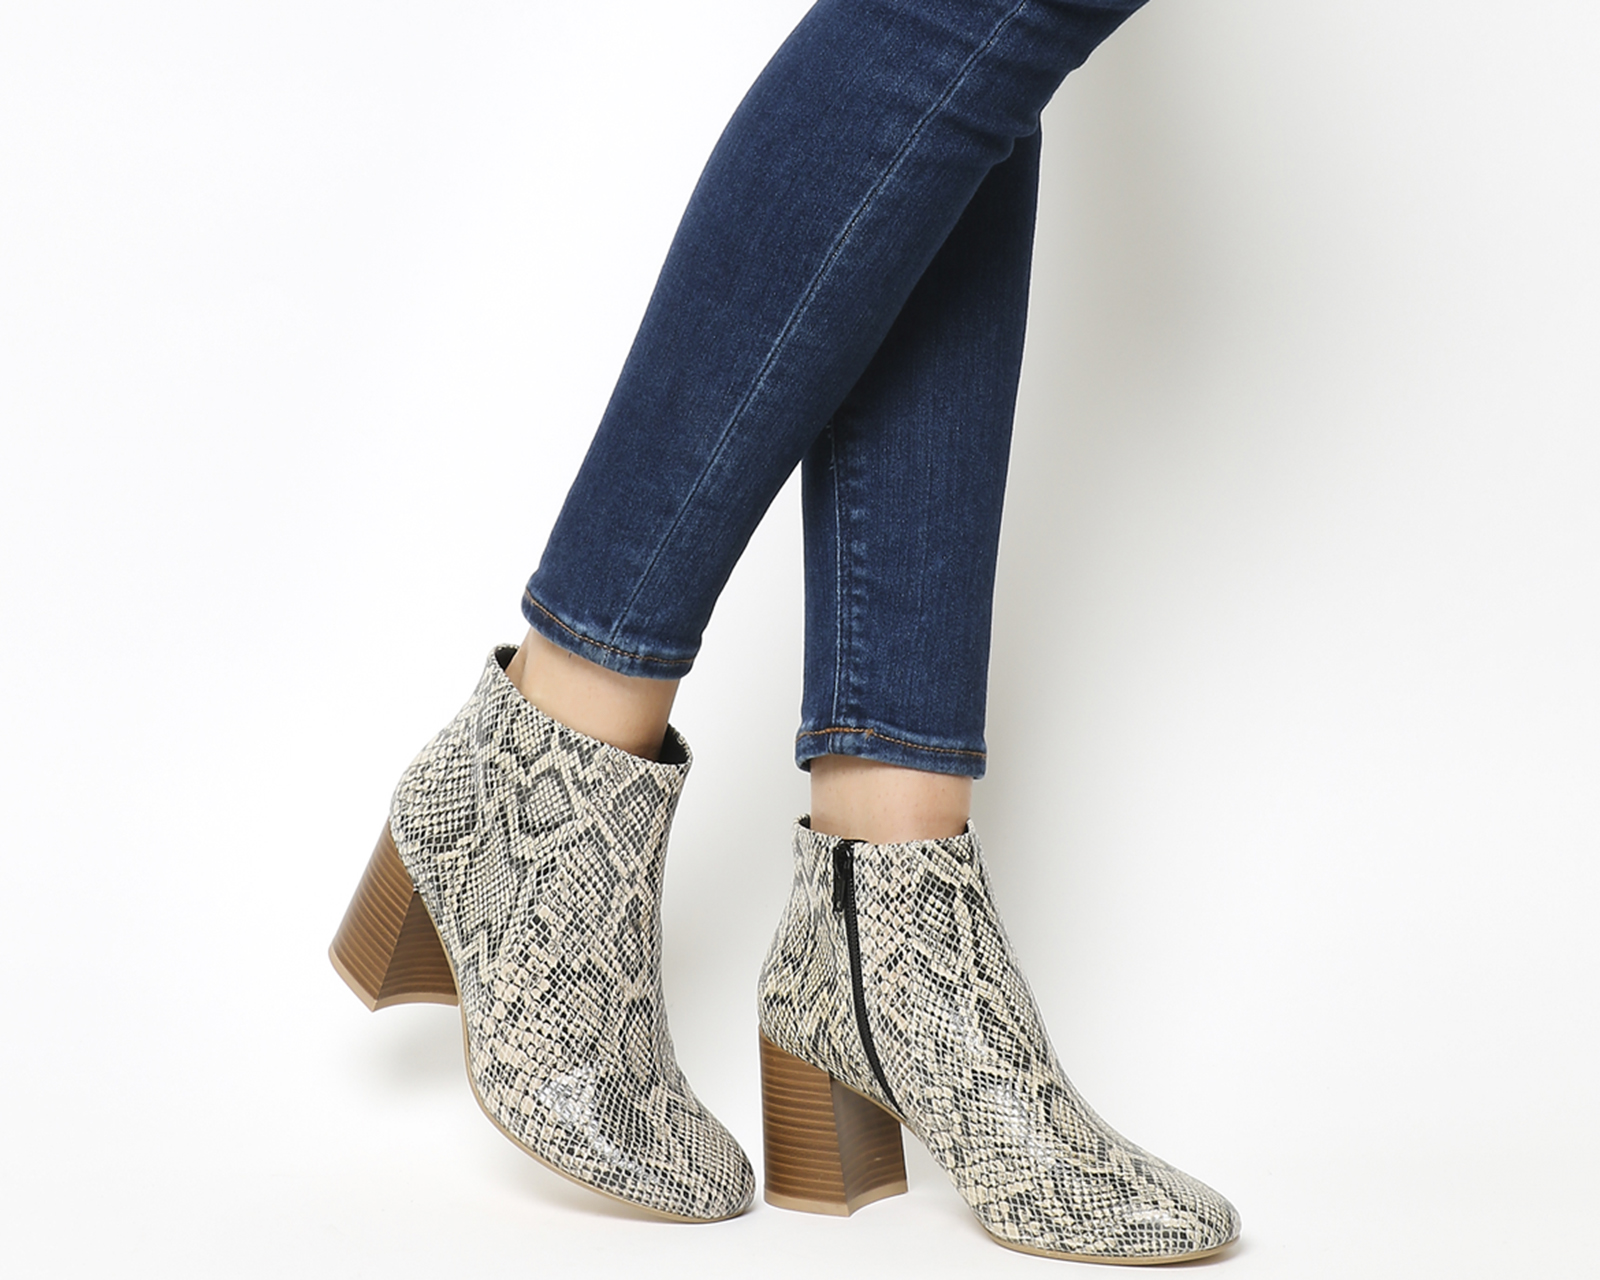 Vagabond Kaley Ankle Boot Snake Leather - Ankle Boots